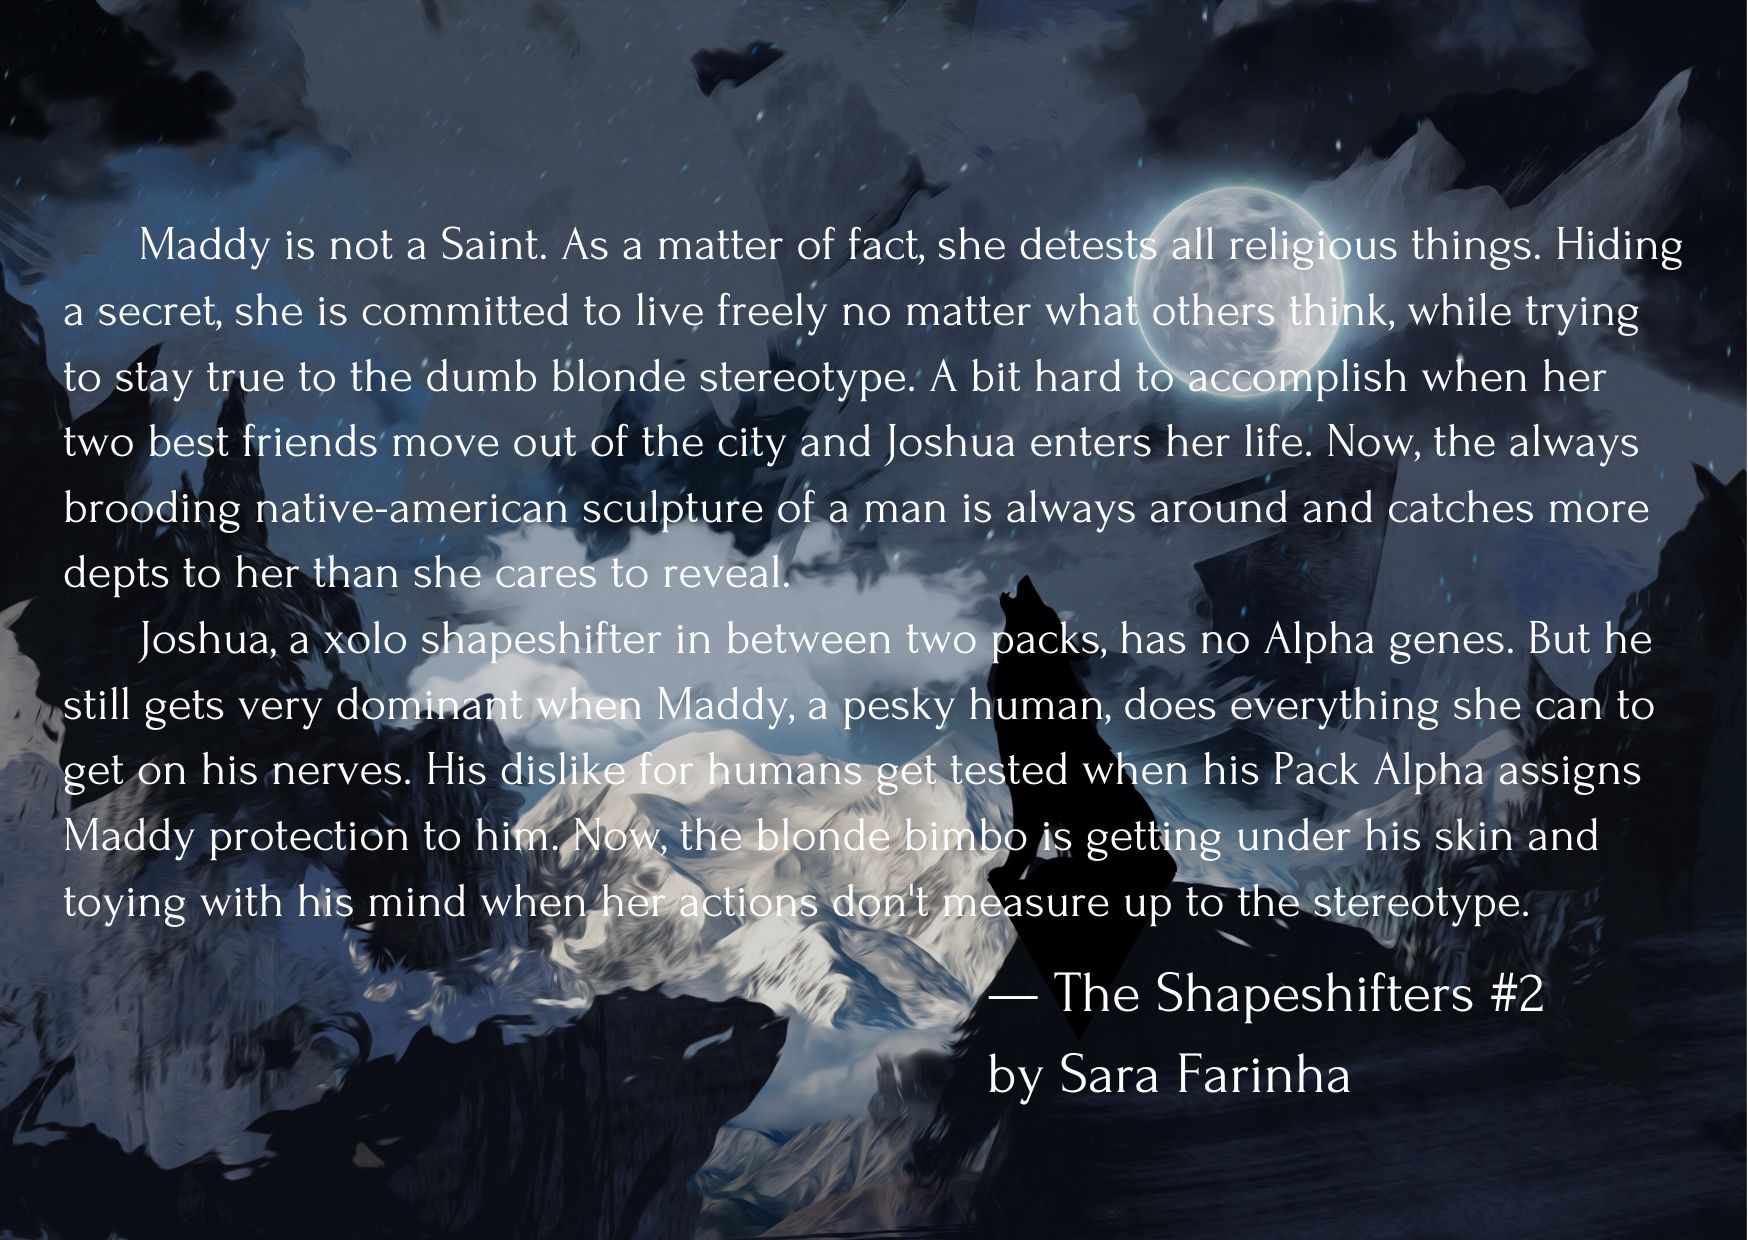 the shapeshifters 2 characters